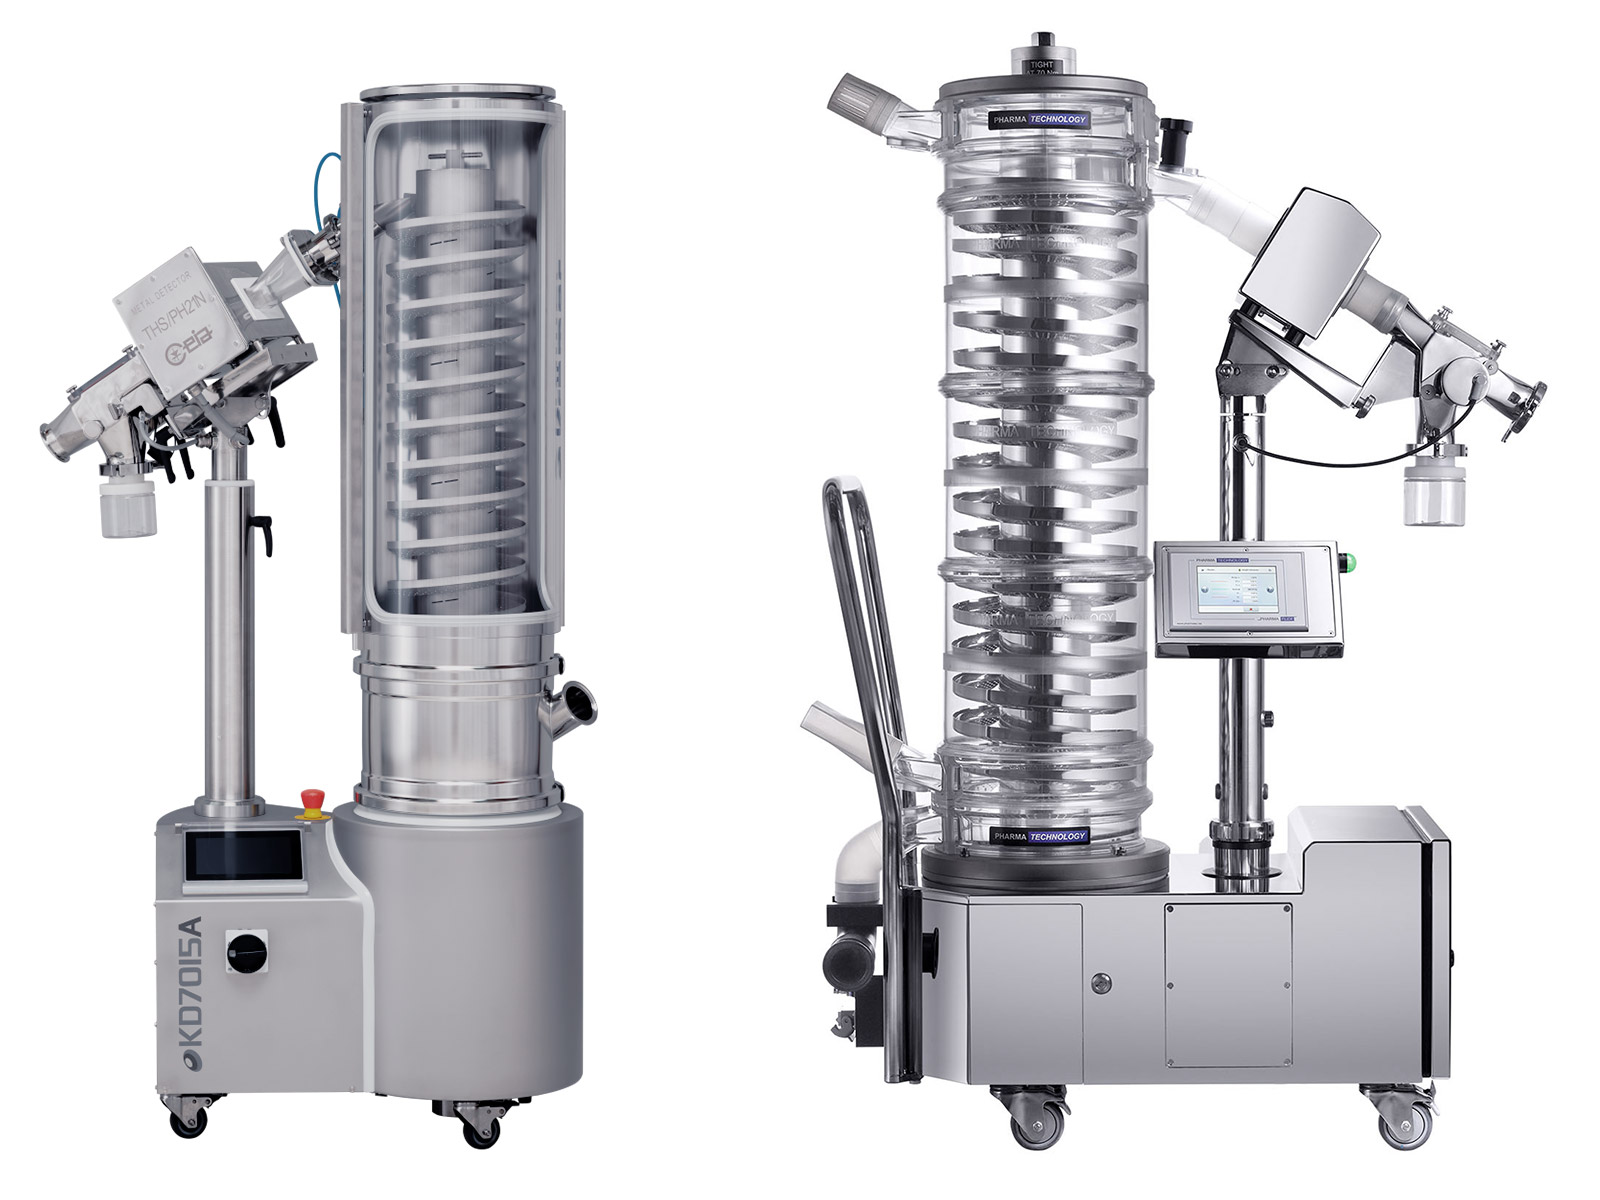 Process equipment - Dust extraction and deburring